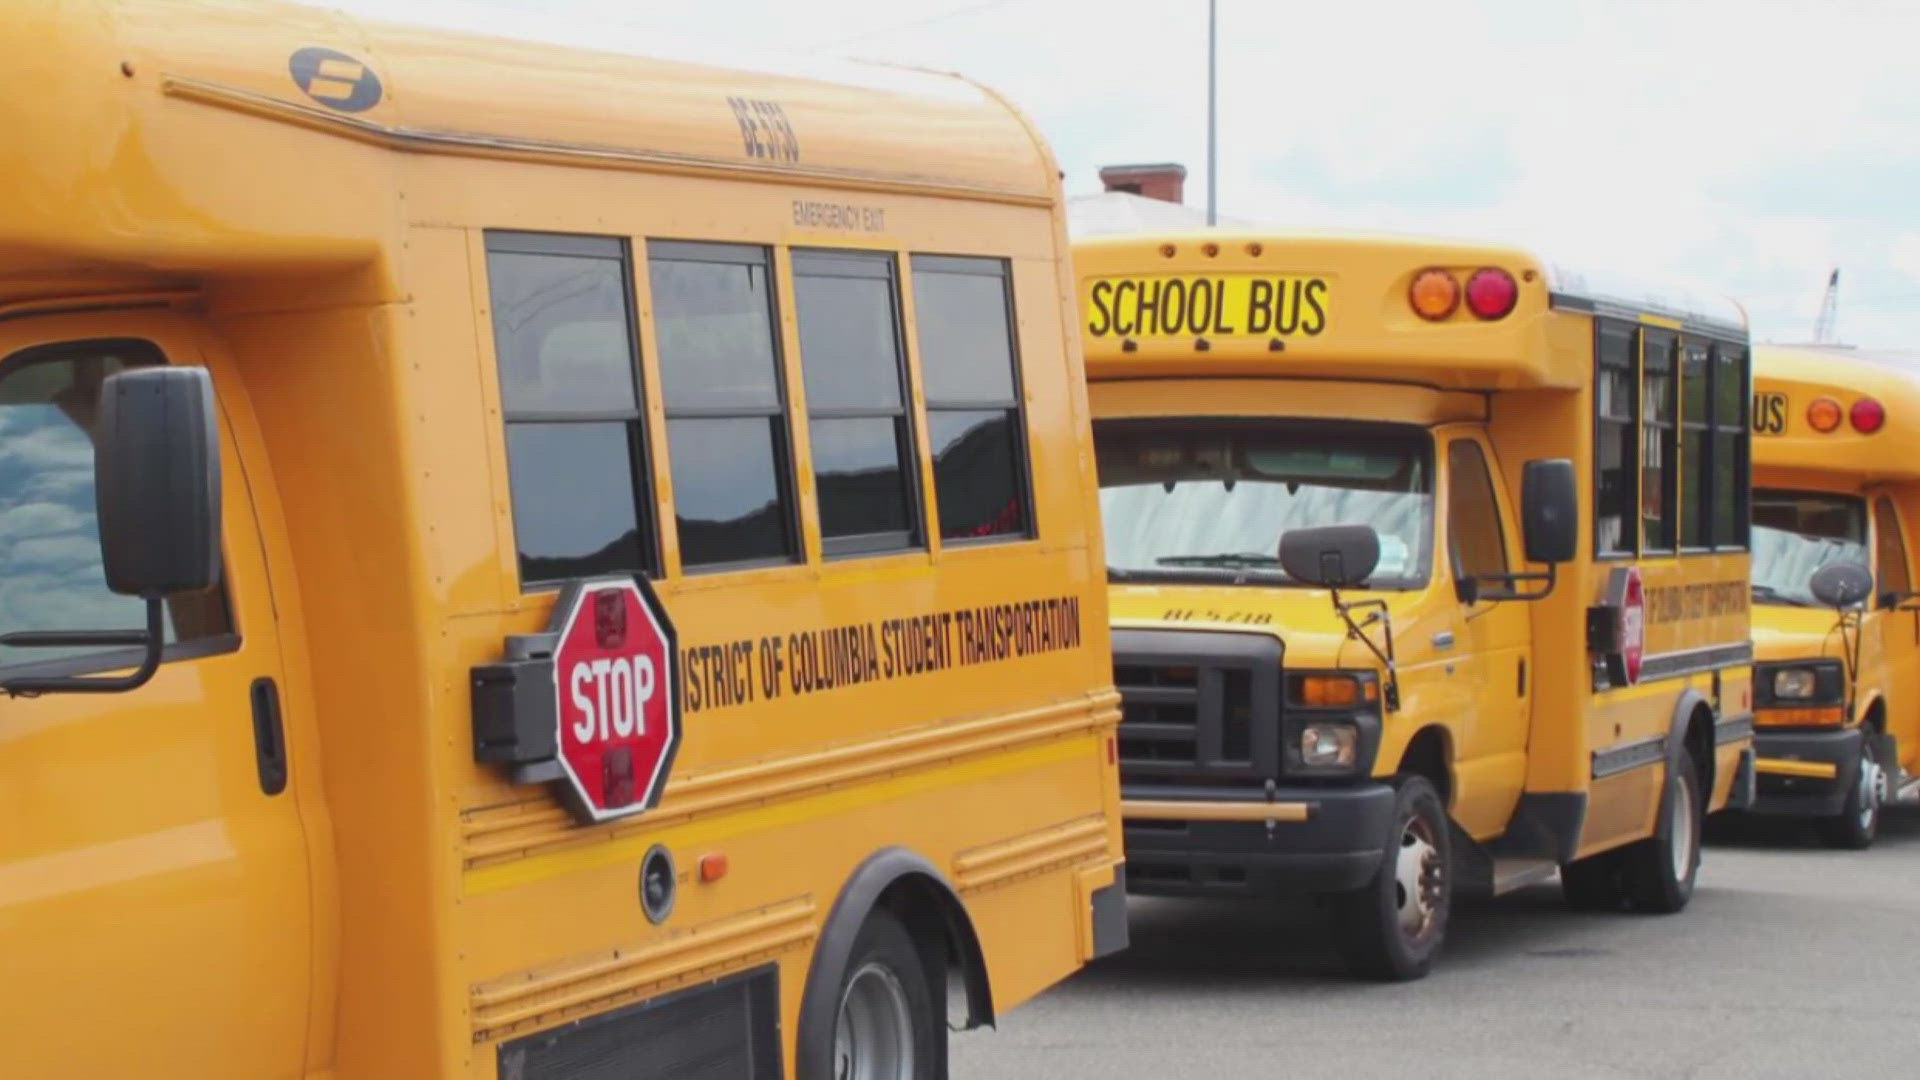 Under the new program, 25 stop-arm safety cameras have been installed on school buses to help curb dangerous driving behavior.